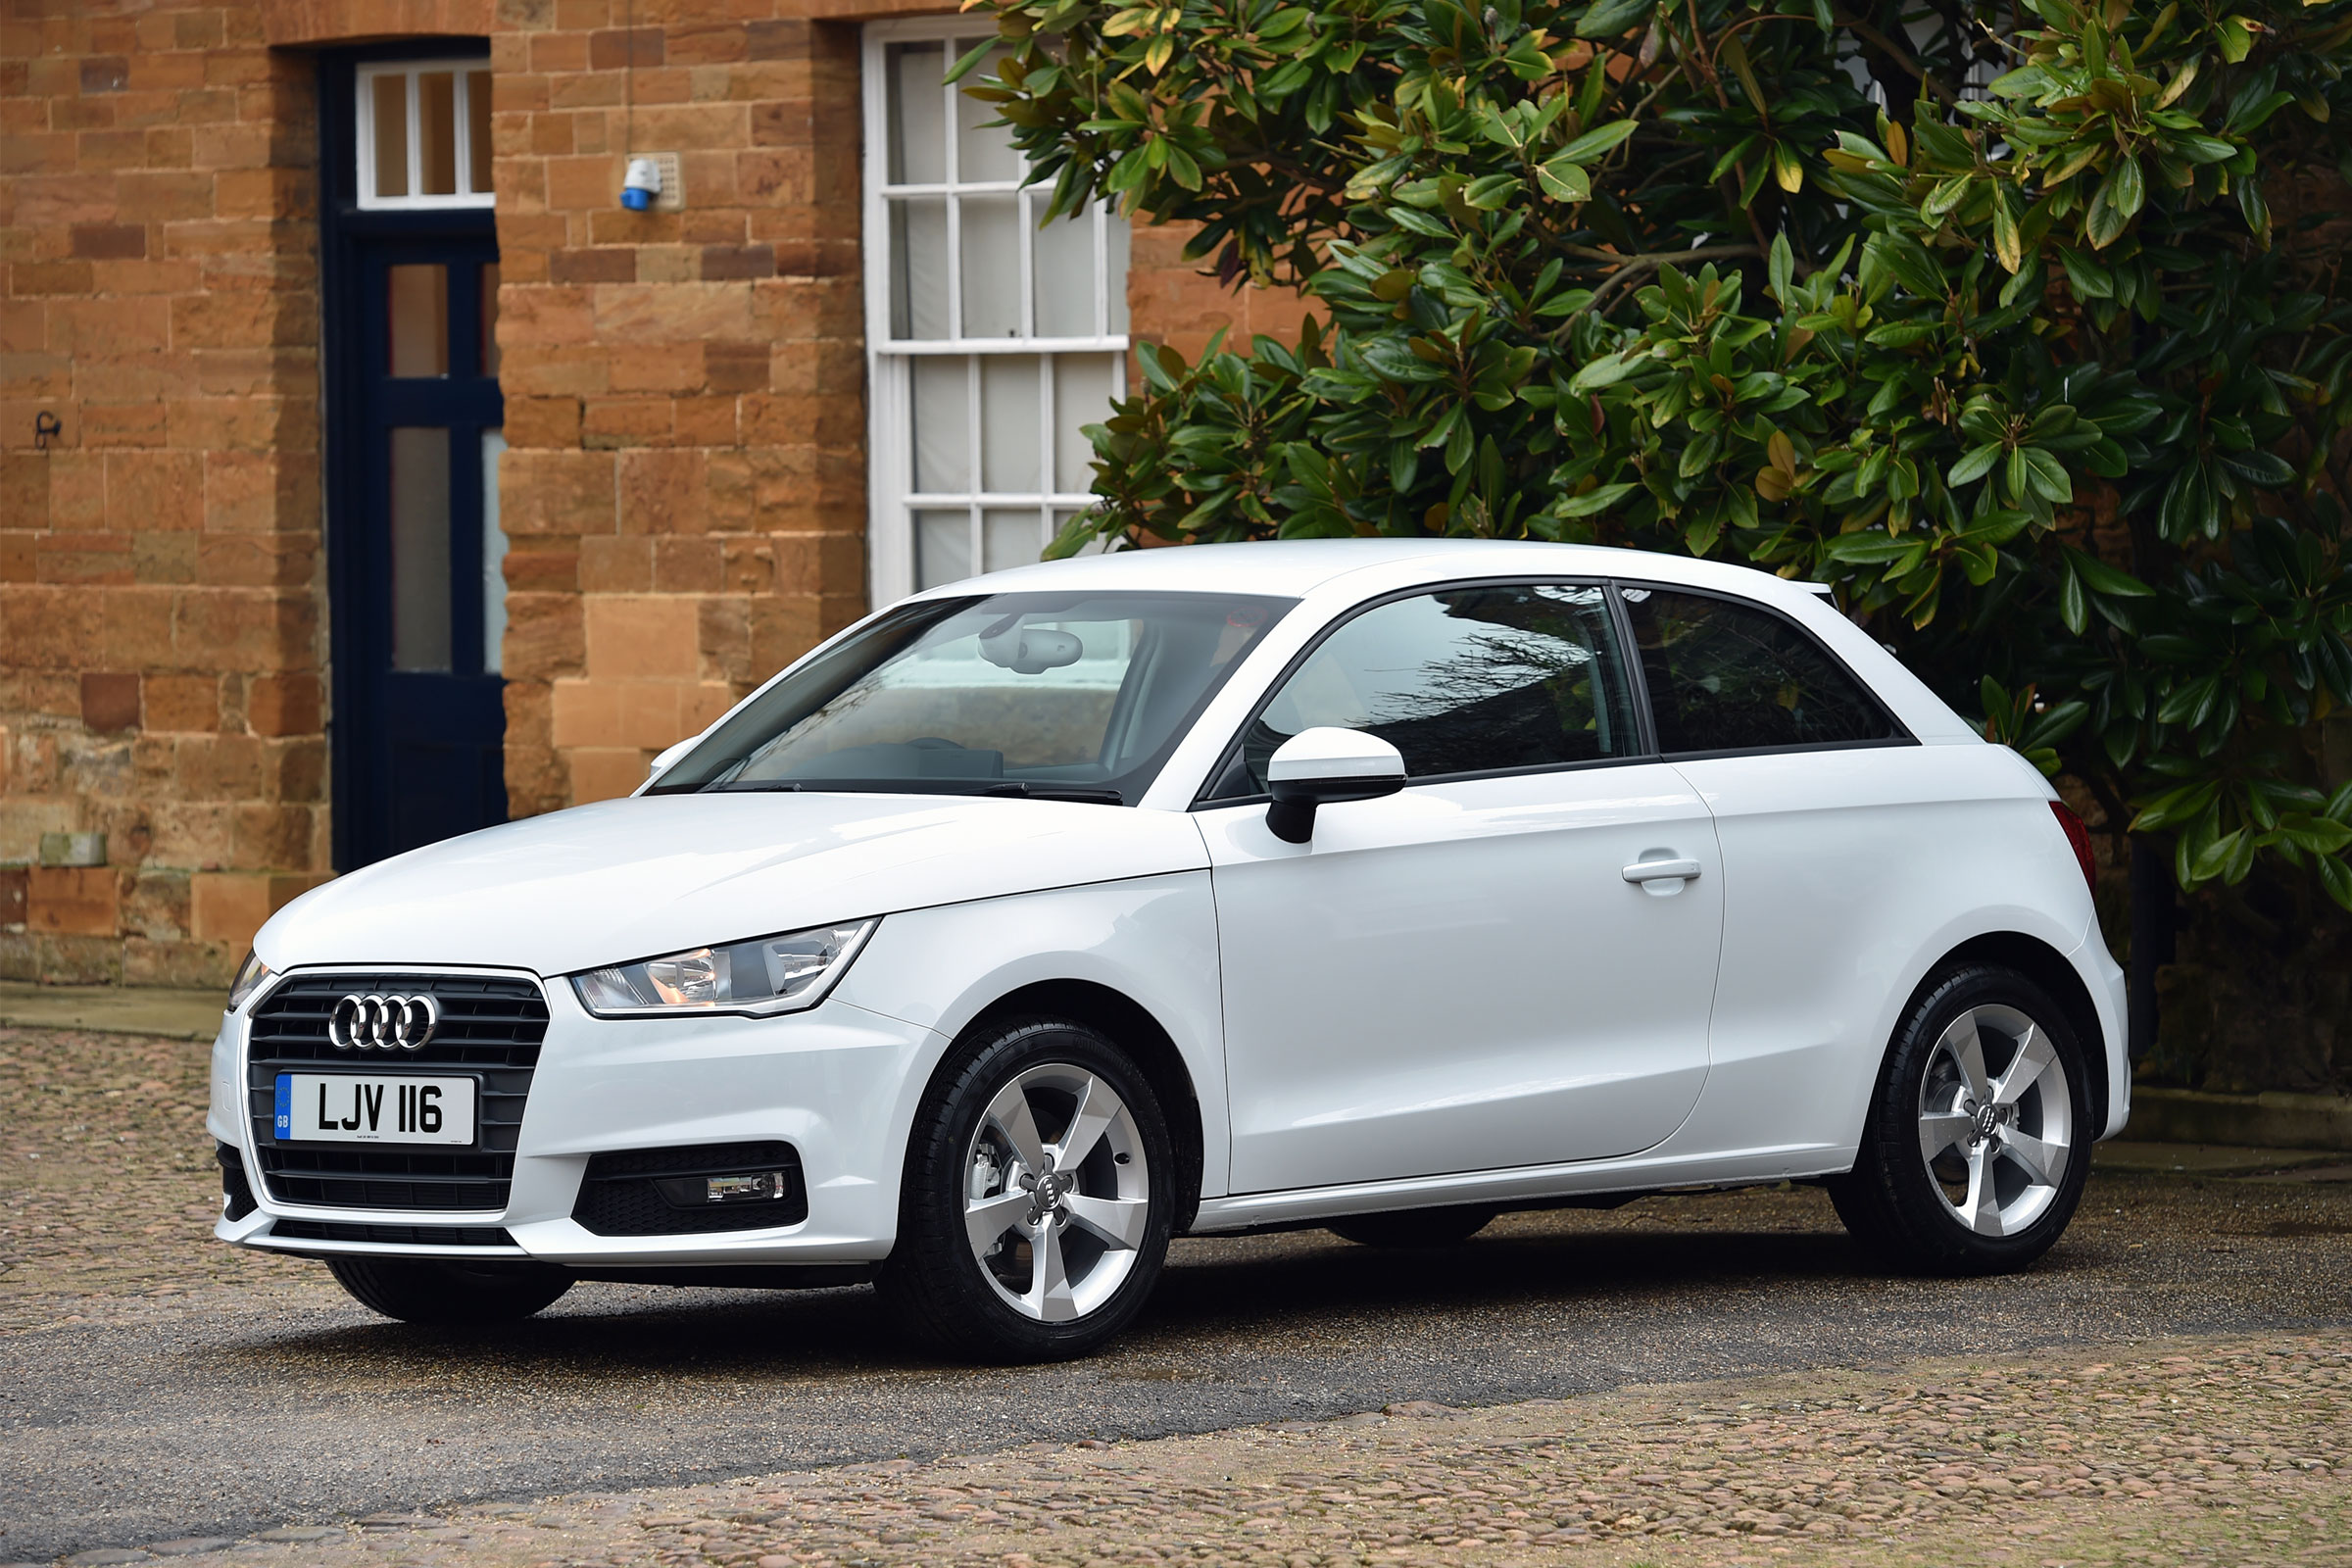 Used Audi A1 review: 2010 to 2019 (Mk1) - Reliability and common